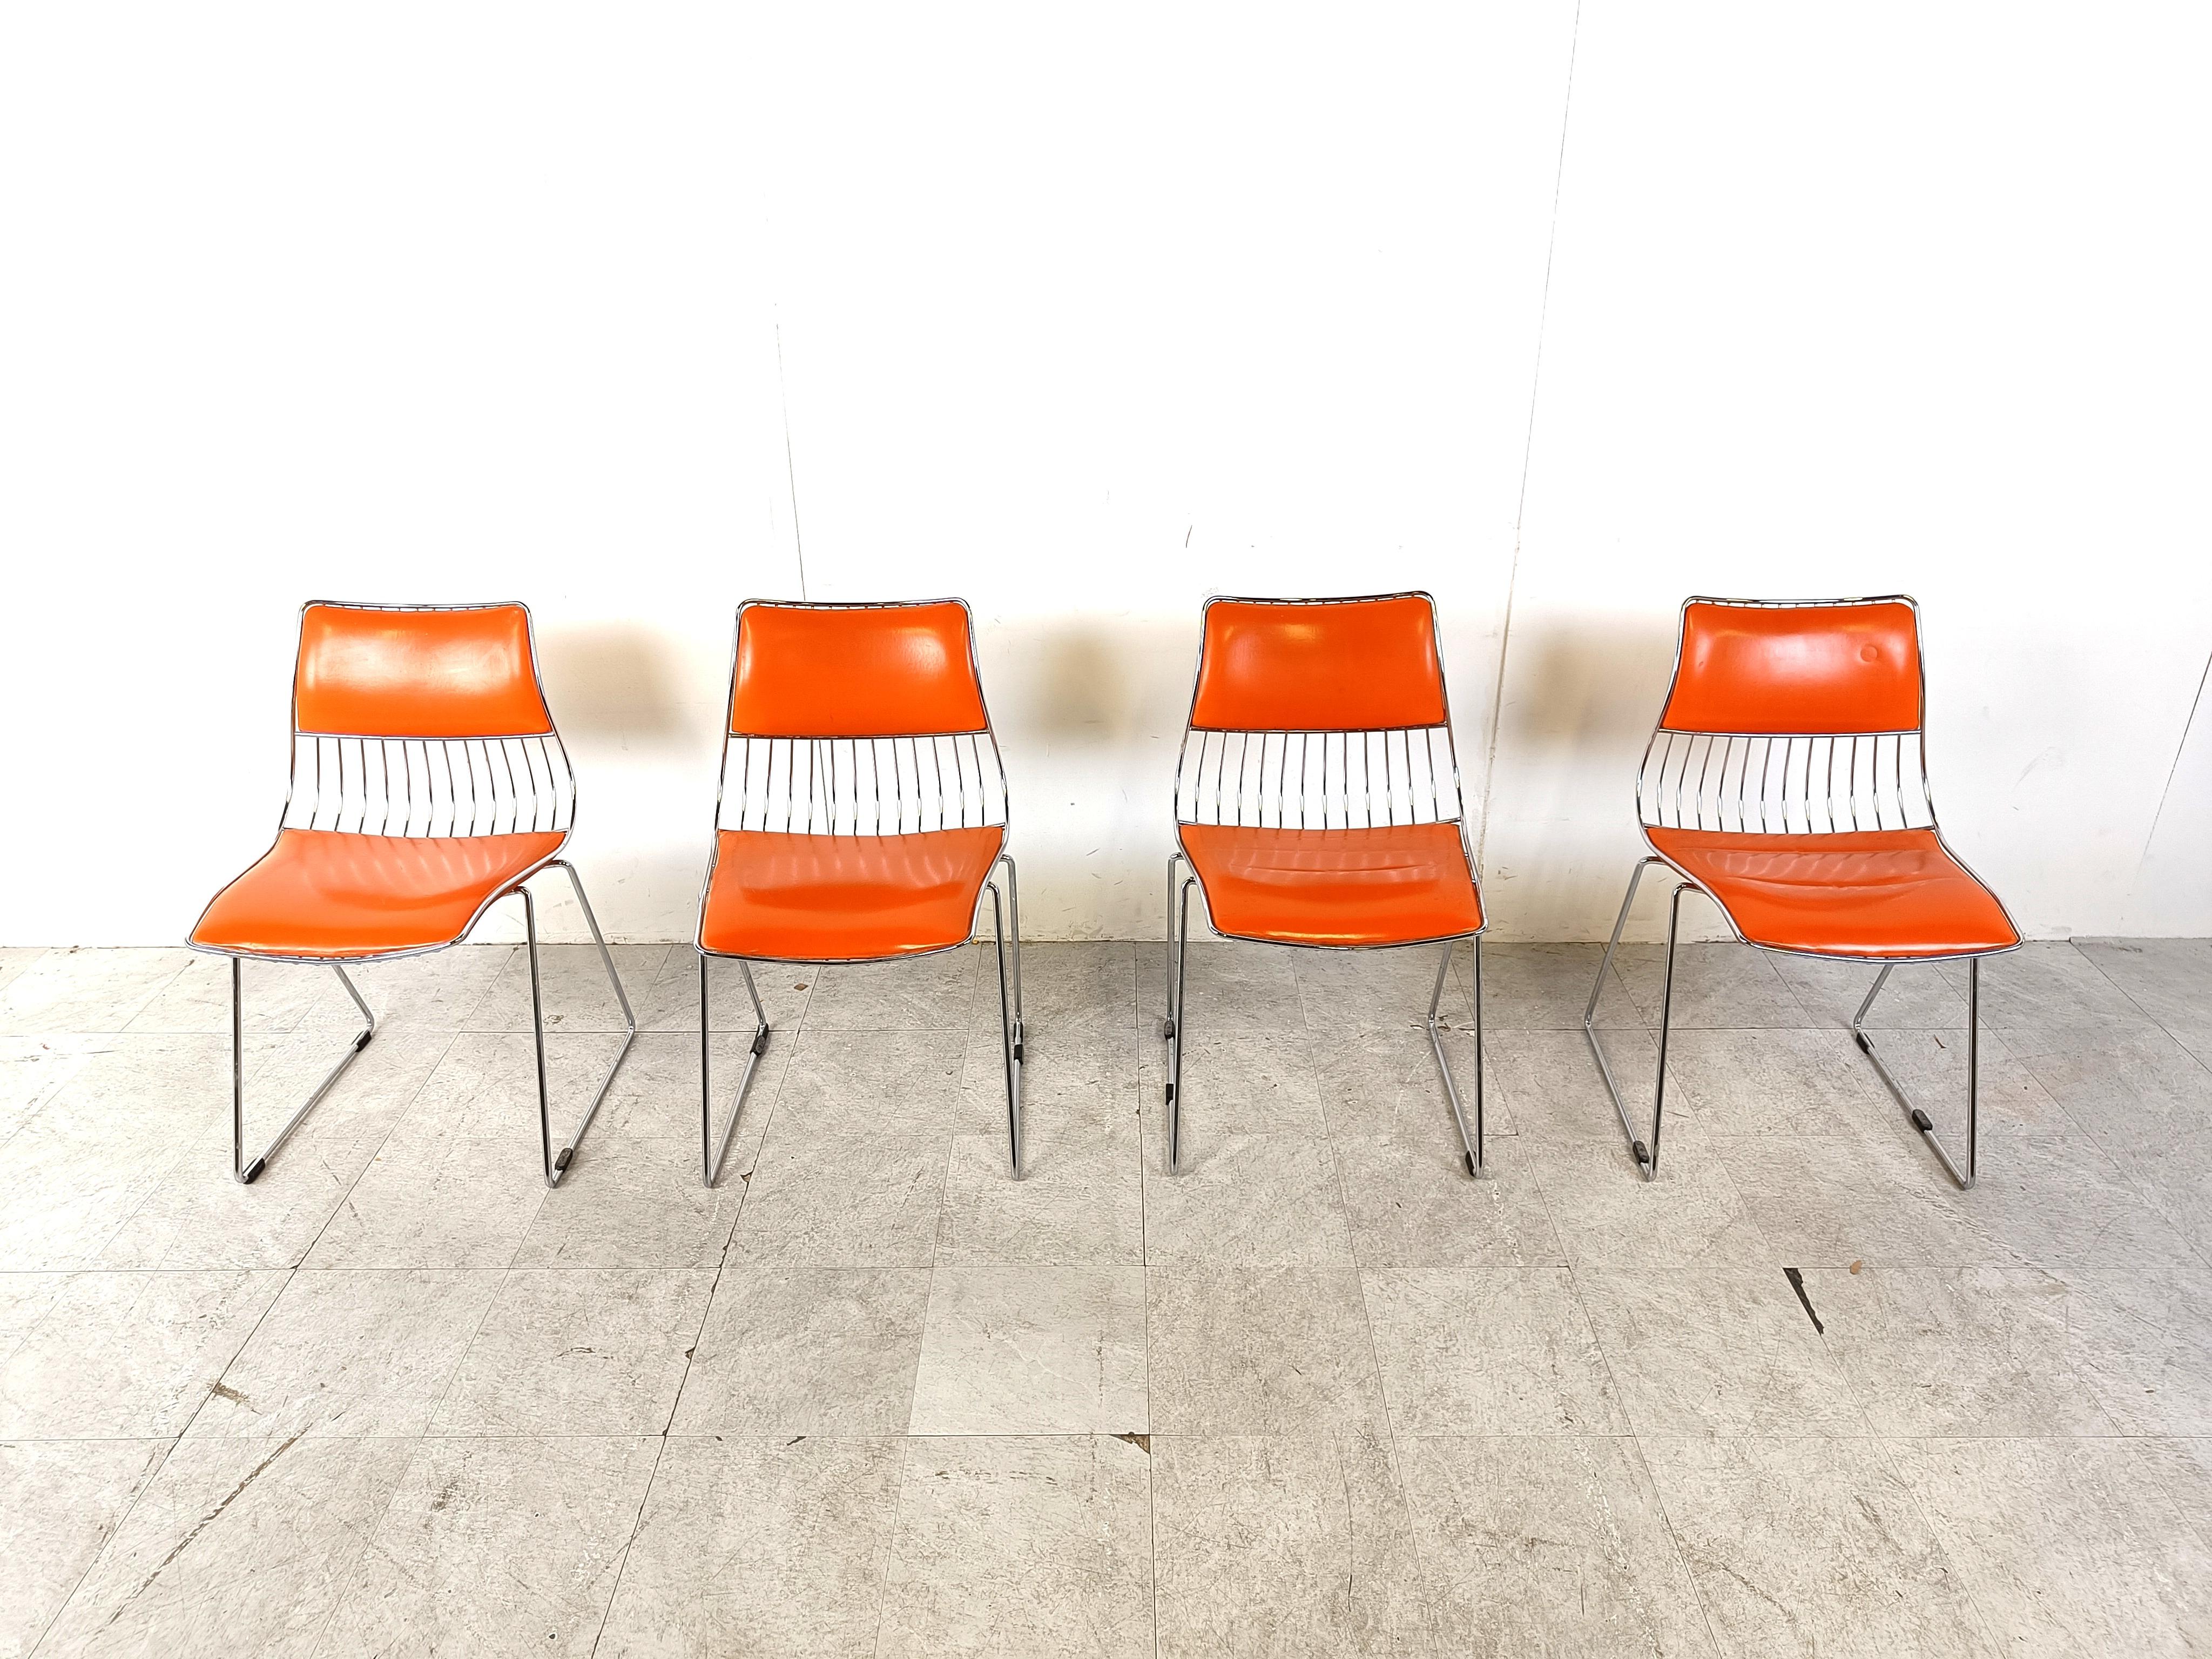 Set of 4 stackable dining chairs designed by Rudi Verelst.

The have a heavy wired chrome frame with orange faux leather upholstery.

The chairs are in a very good condition with no damages.

They sit well and have a sturdy design.

1970s -